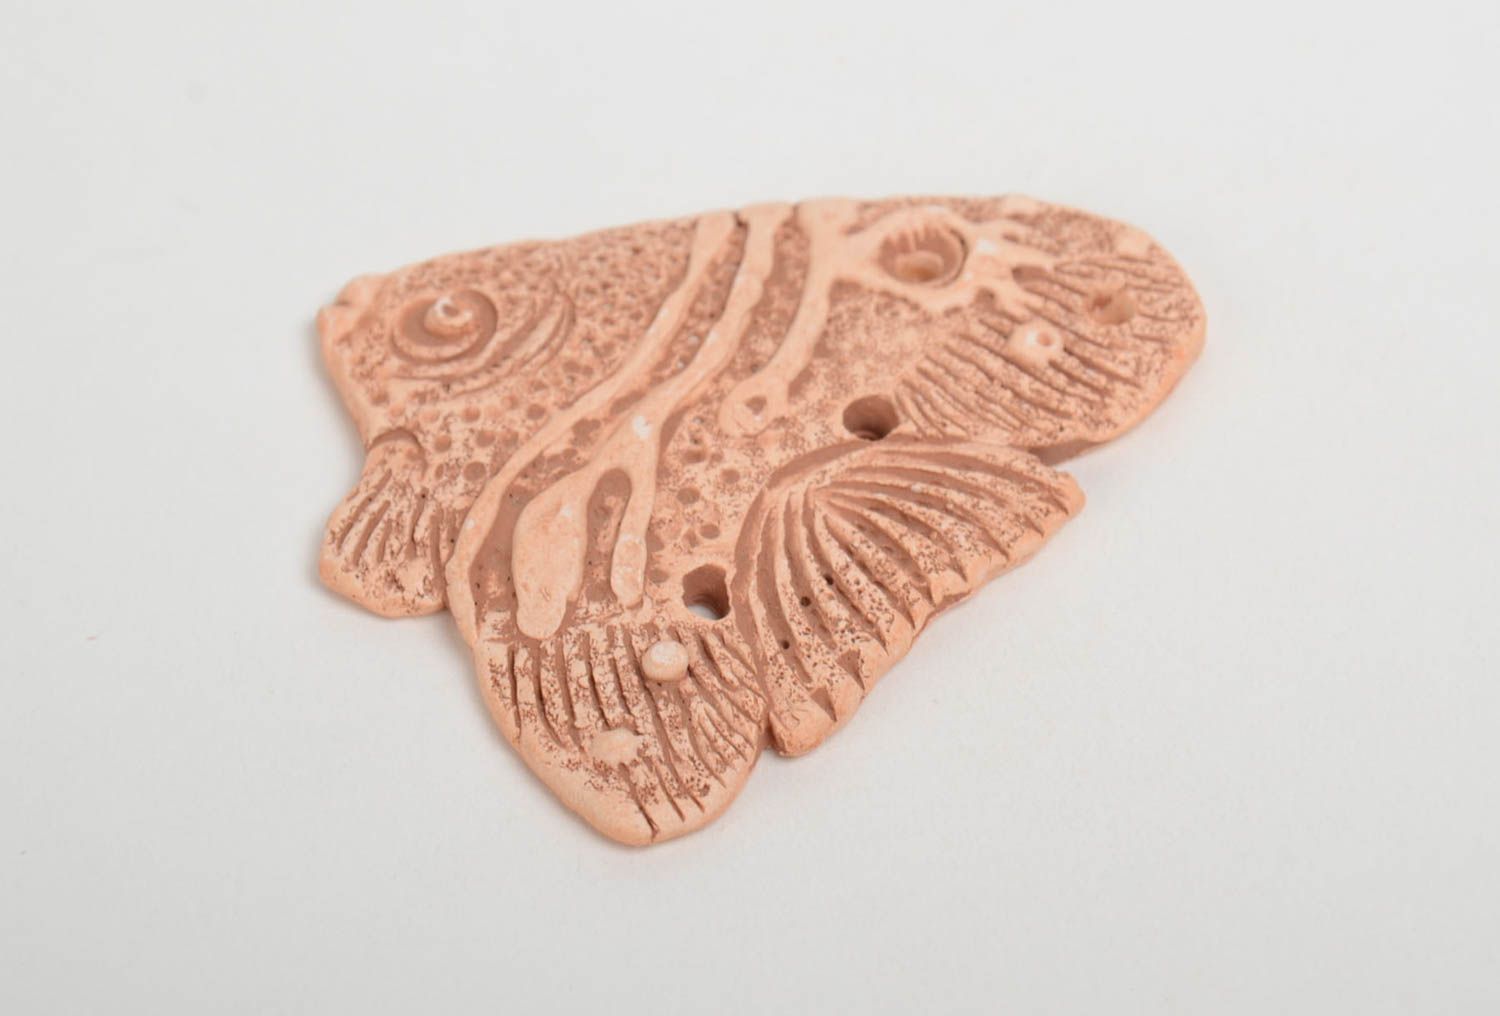 Handmade designer clay blank pendant for painting Fish jewelry making supplies photo 4